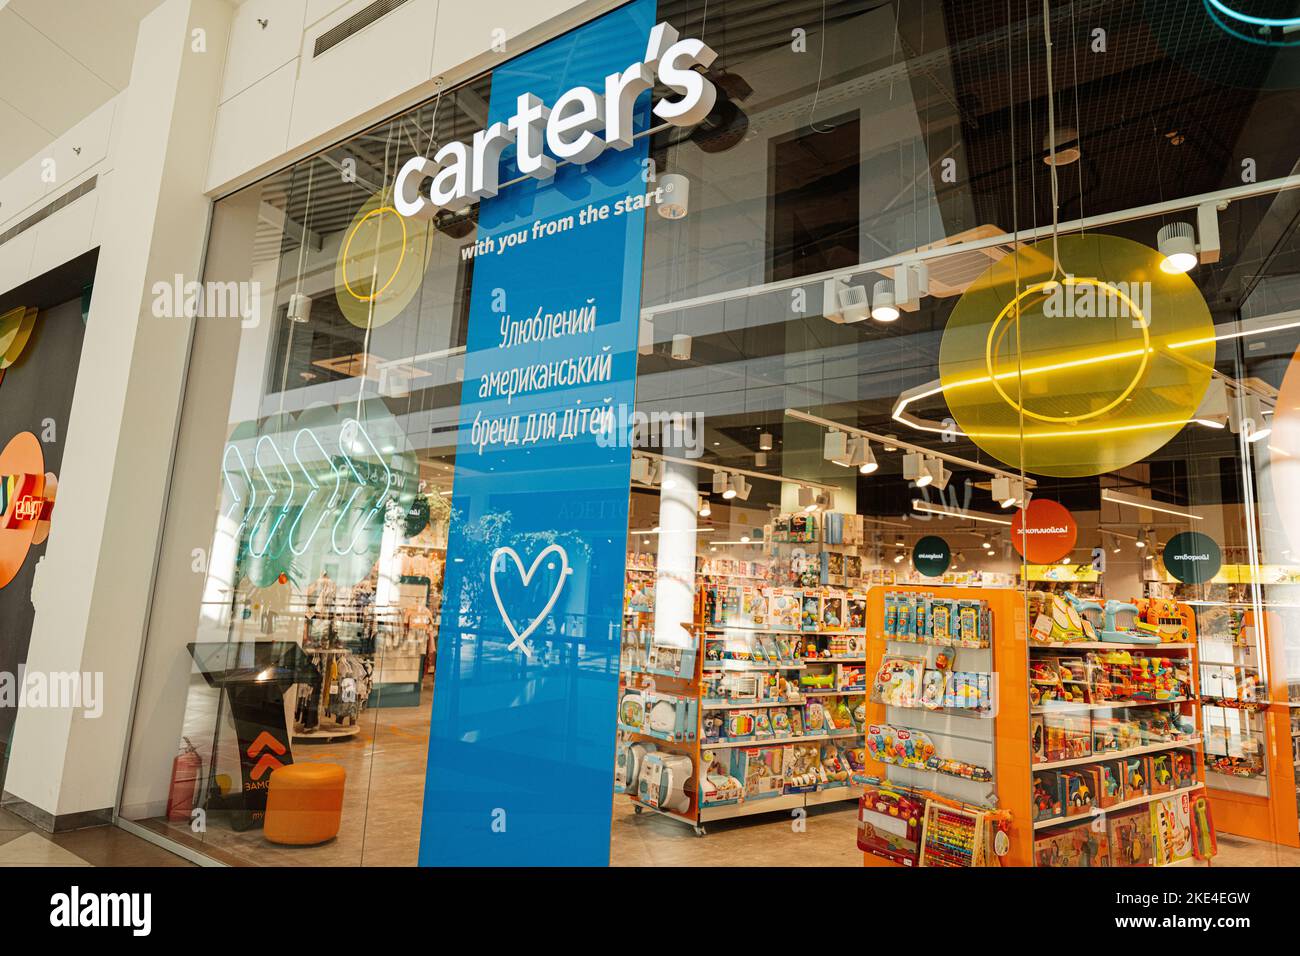 Carter S and Oshkosh Store for Babies and Kids in Ottawa, Canada